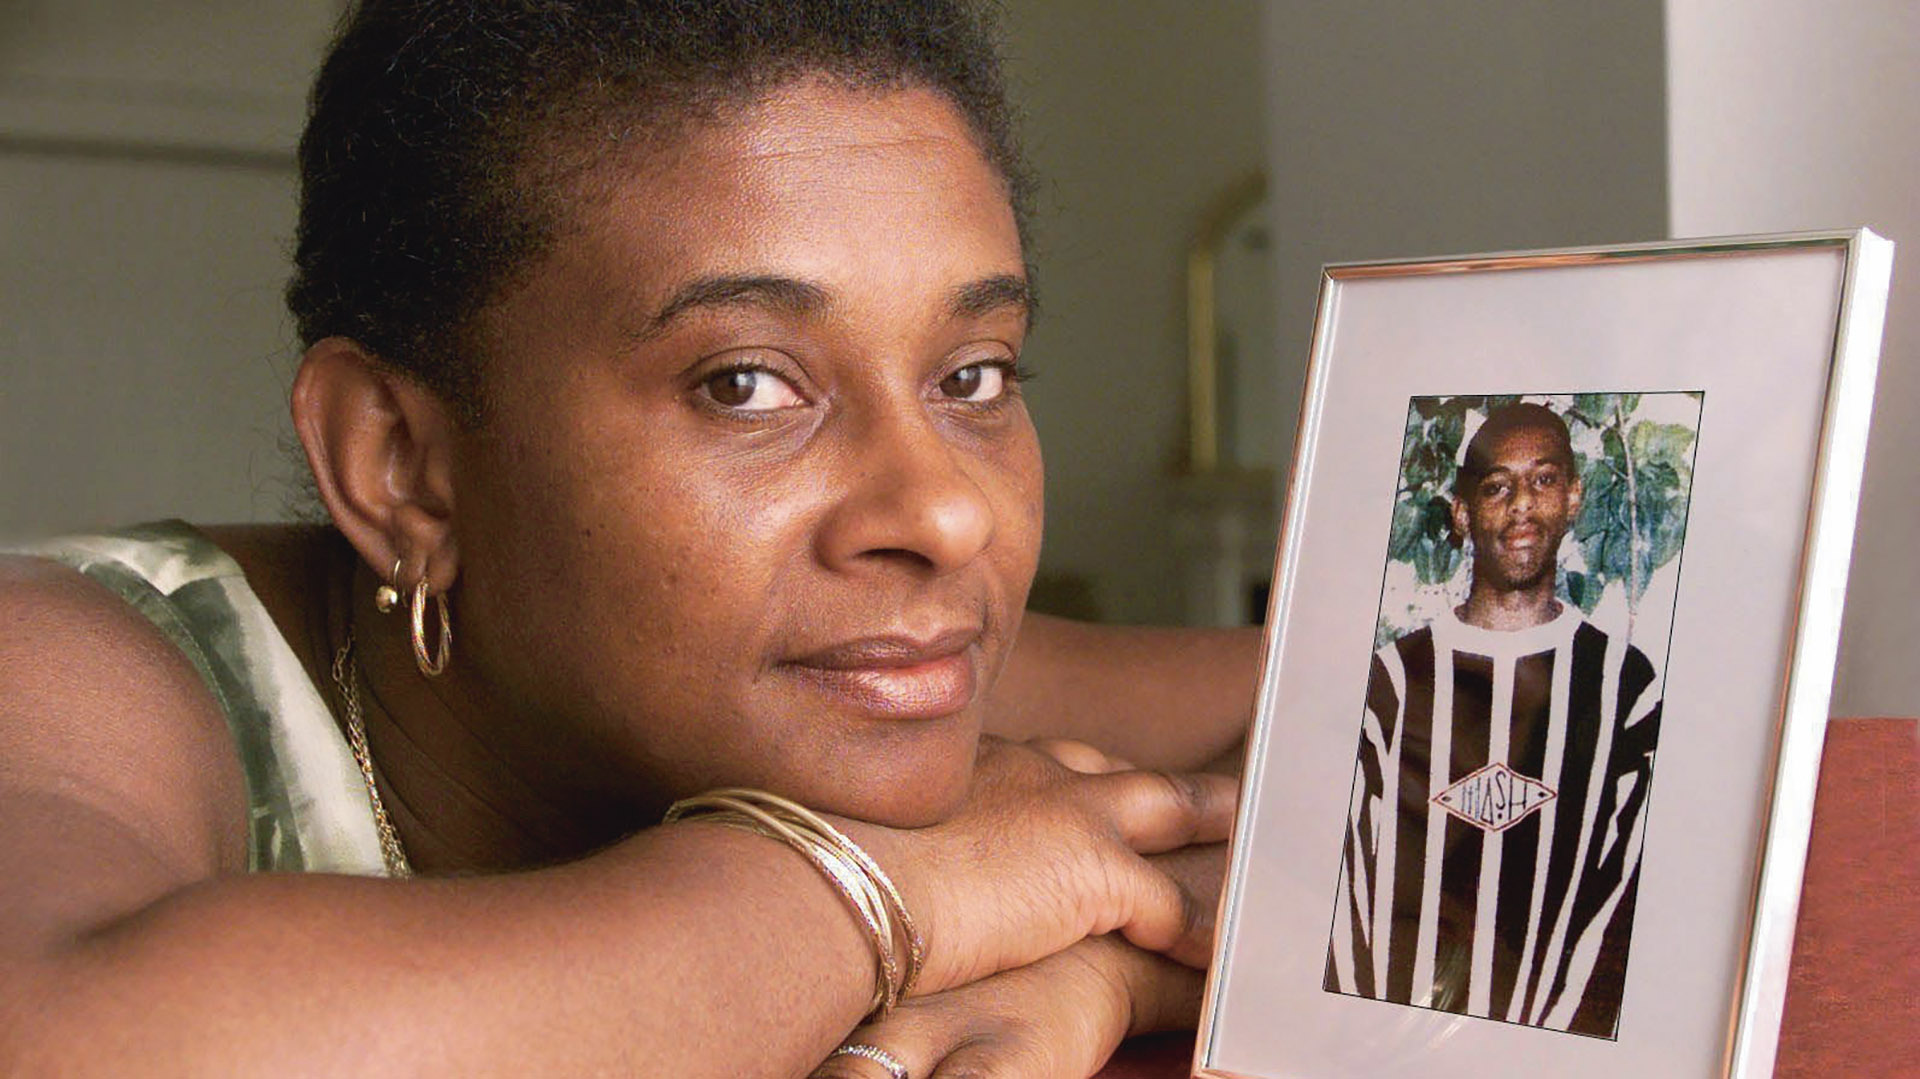 Doreen Lawrence 1999 with a photograph of her late son, Stephen